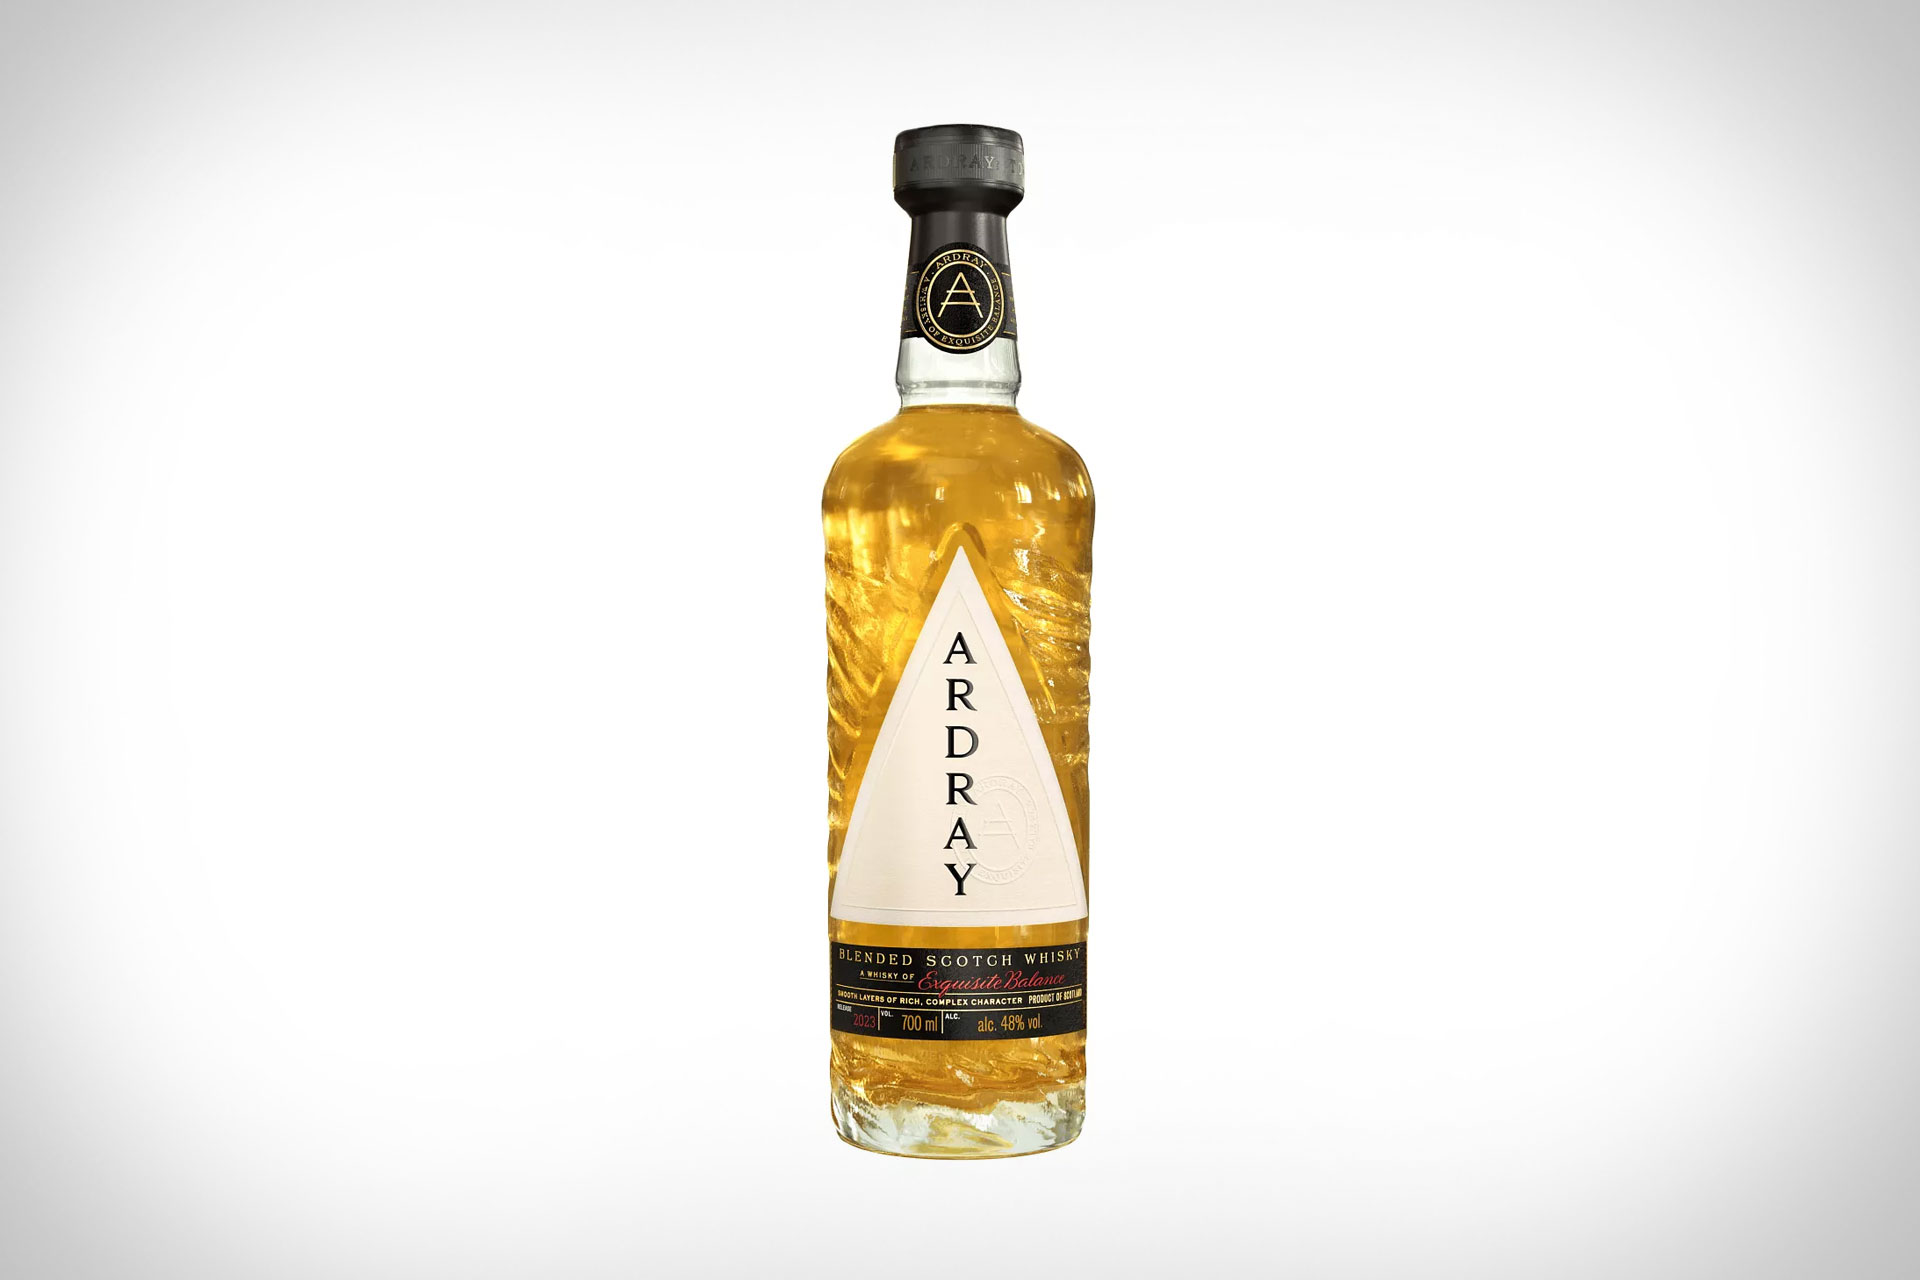 Ardray Blended Scotch Whisky | Uncrate